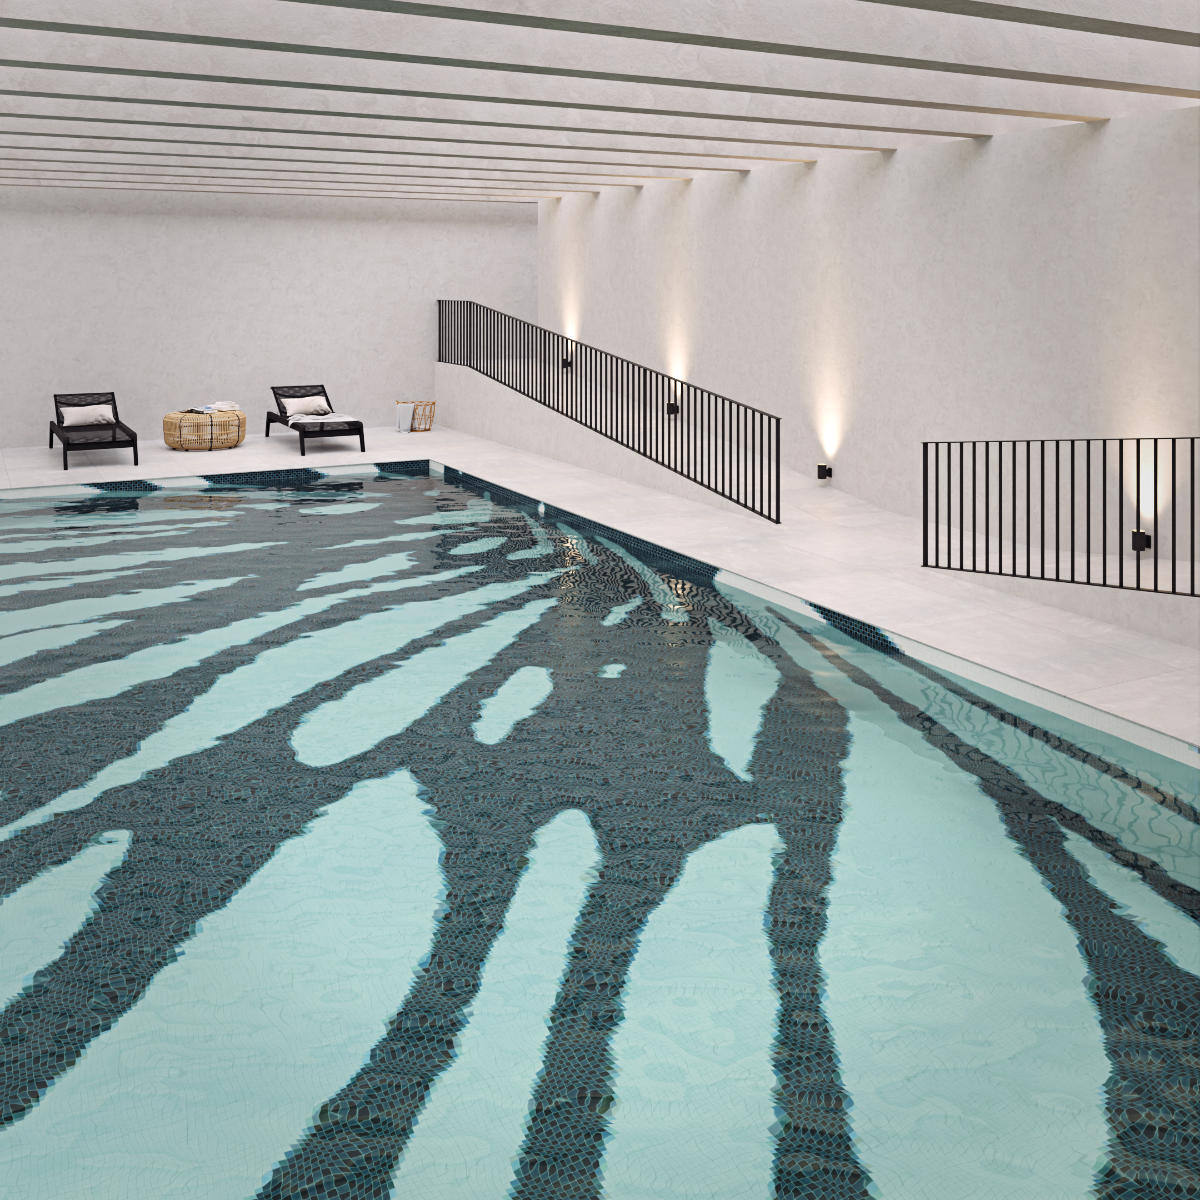 Swimming pool - a minimalist design with an individually designed mosaic from Trufle Mozaiki